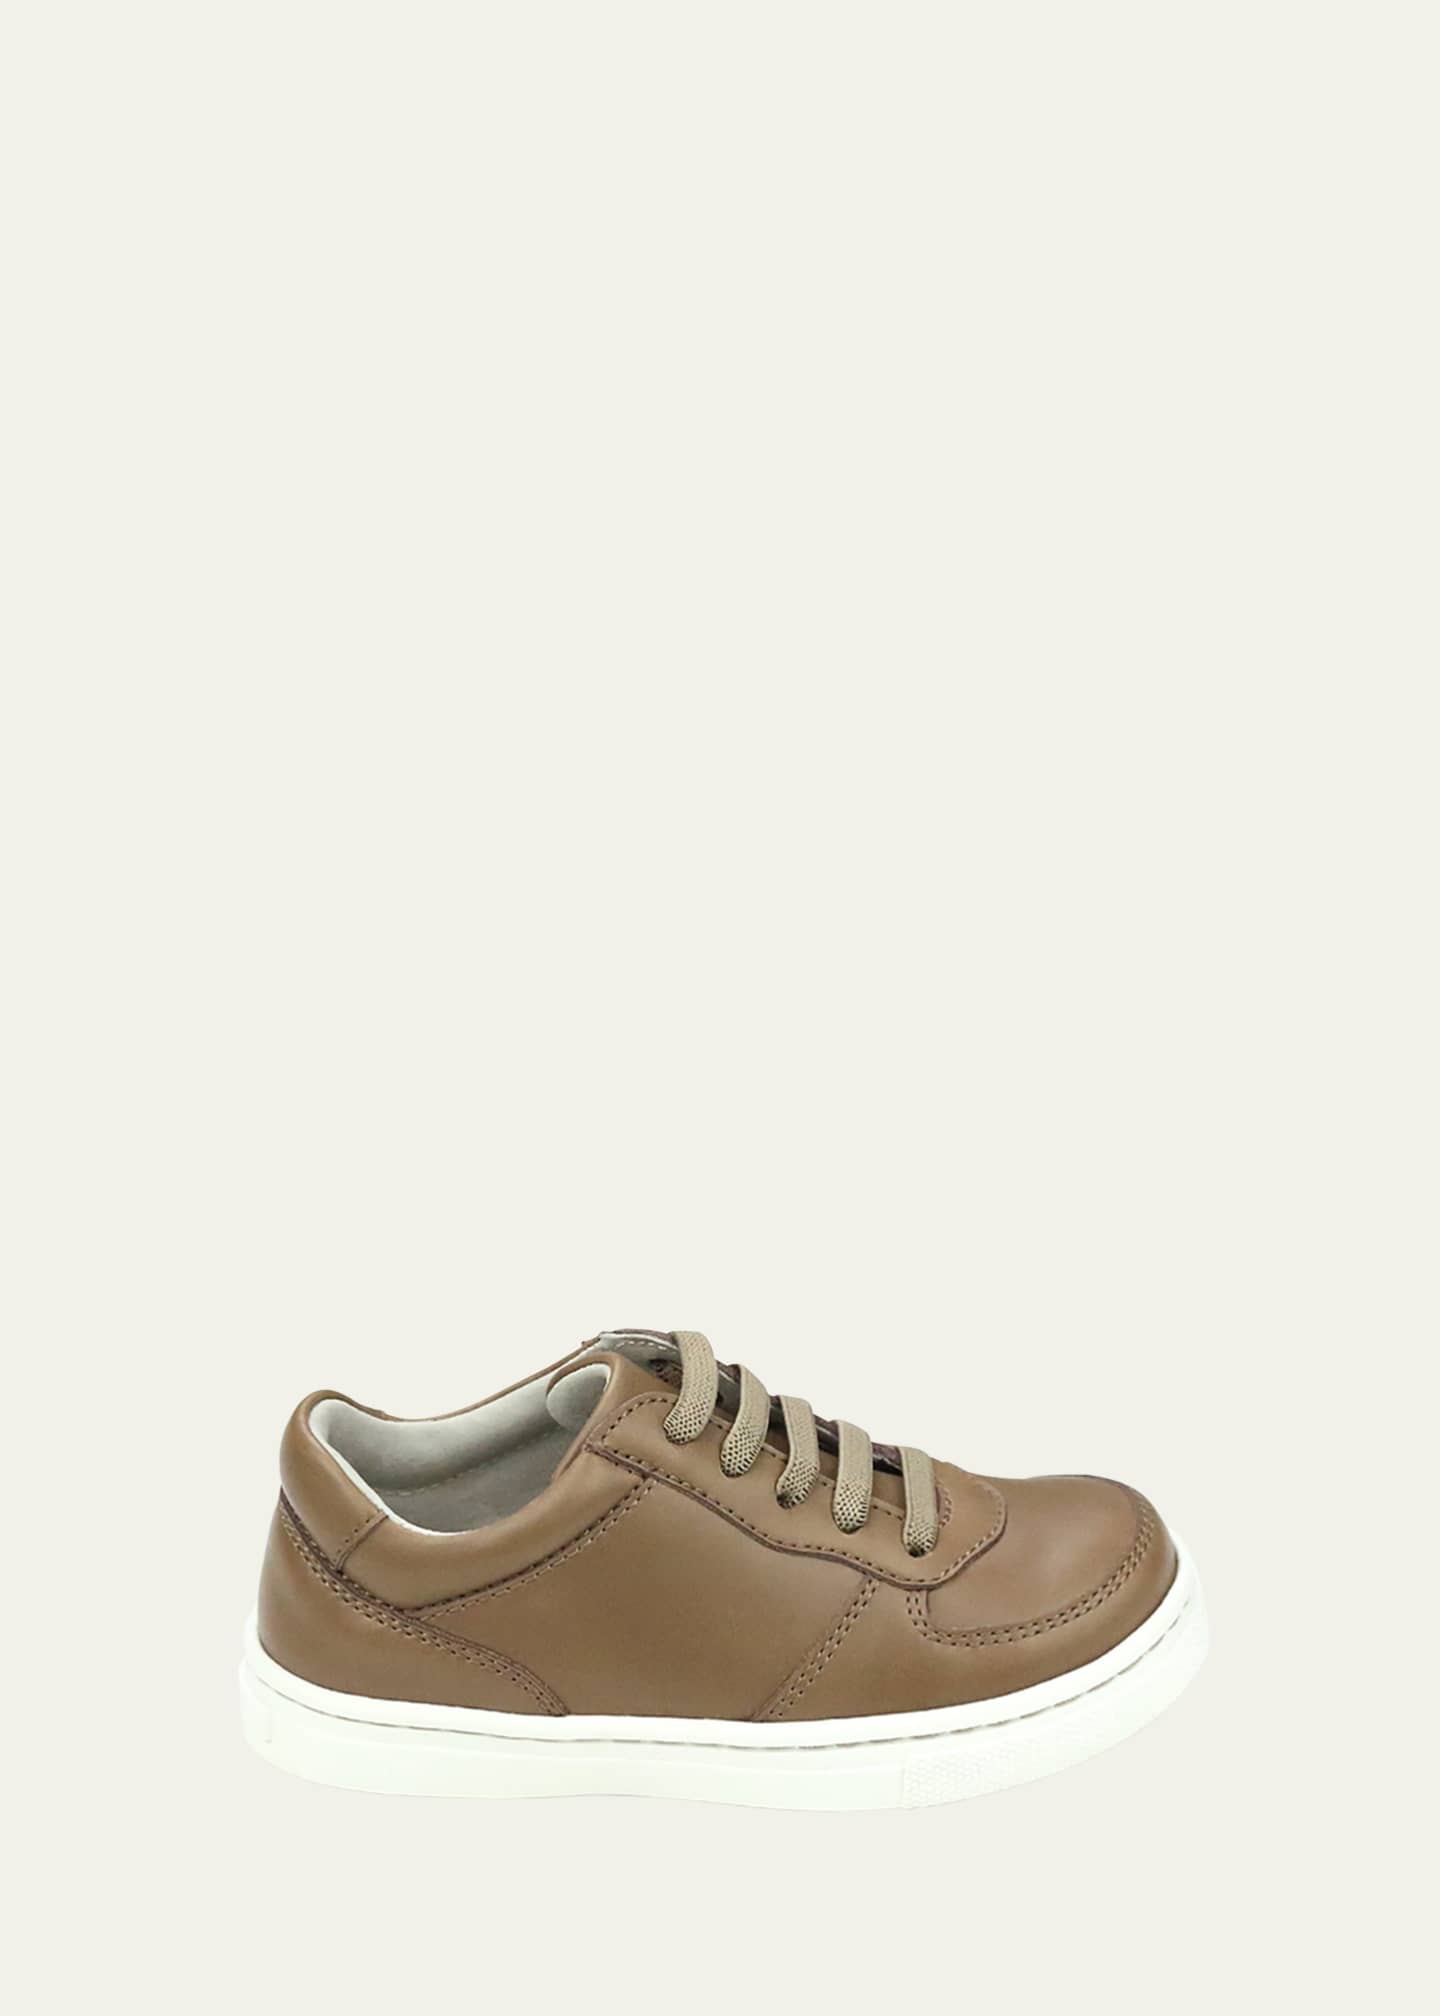 L'Amour Shoes Boy's Grayson Leather Sneakers